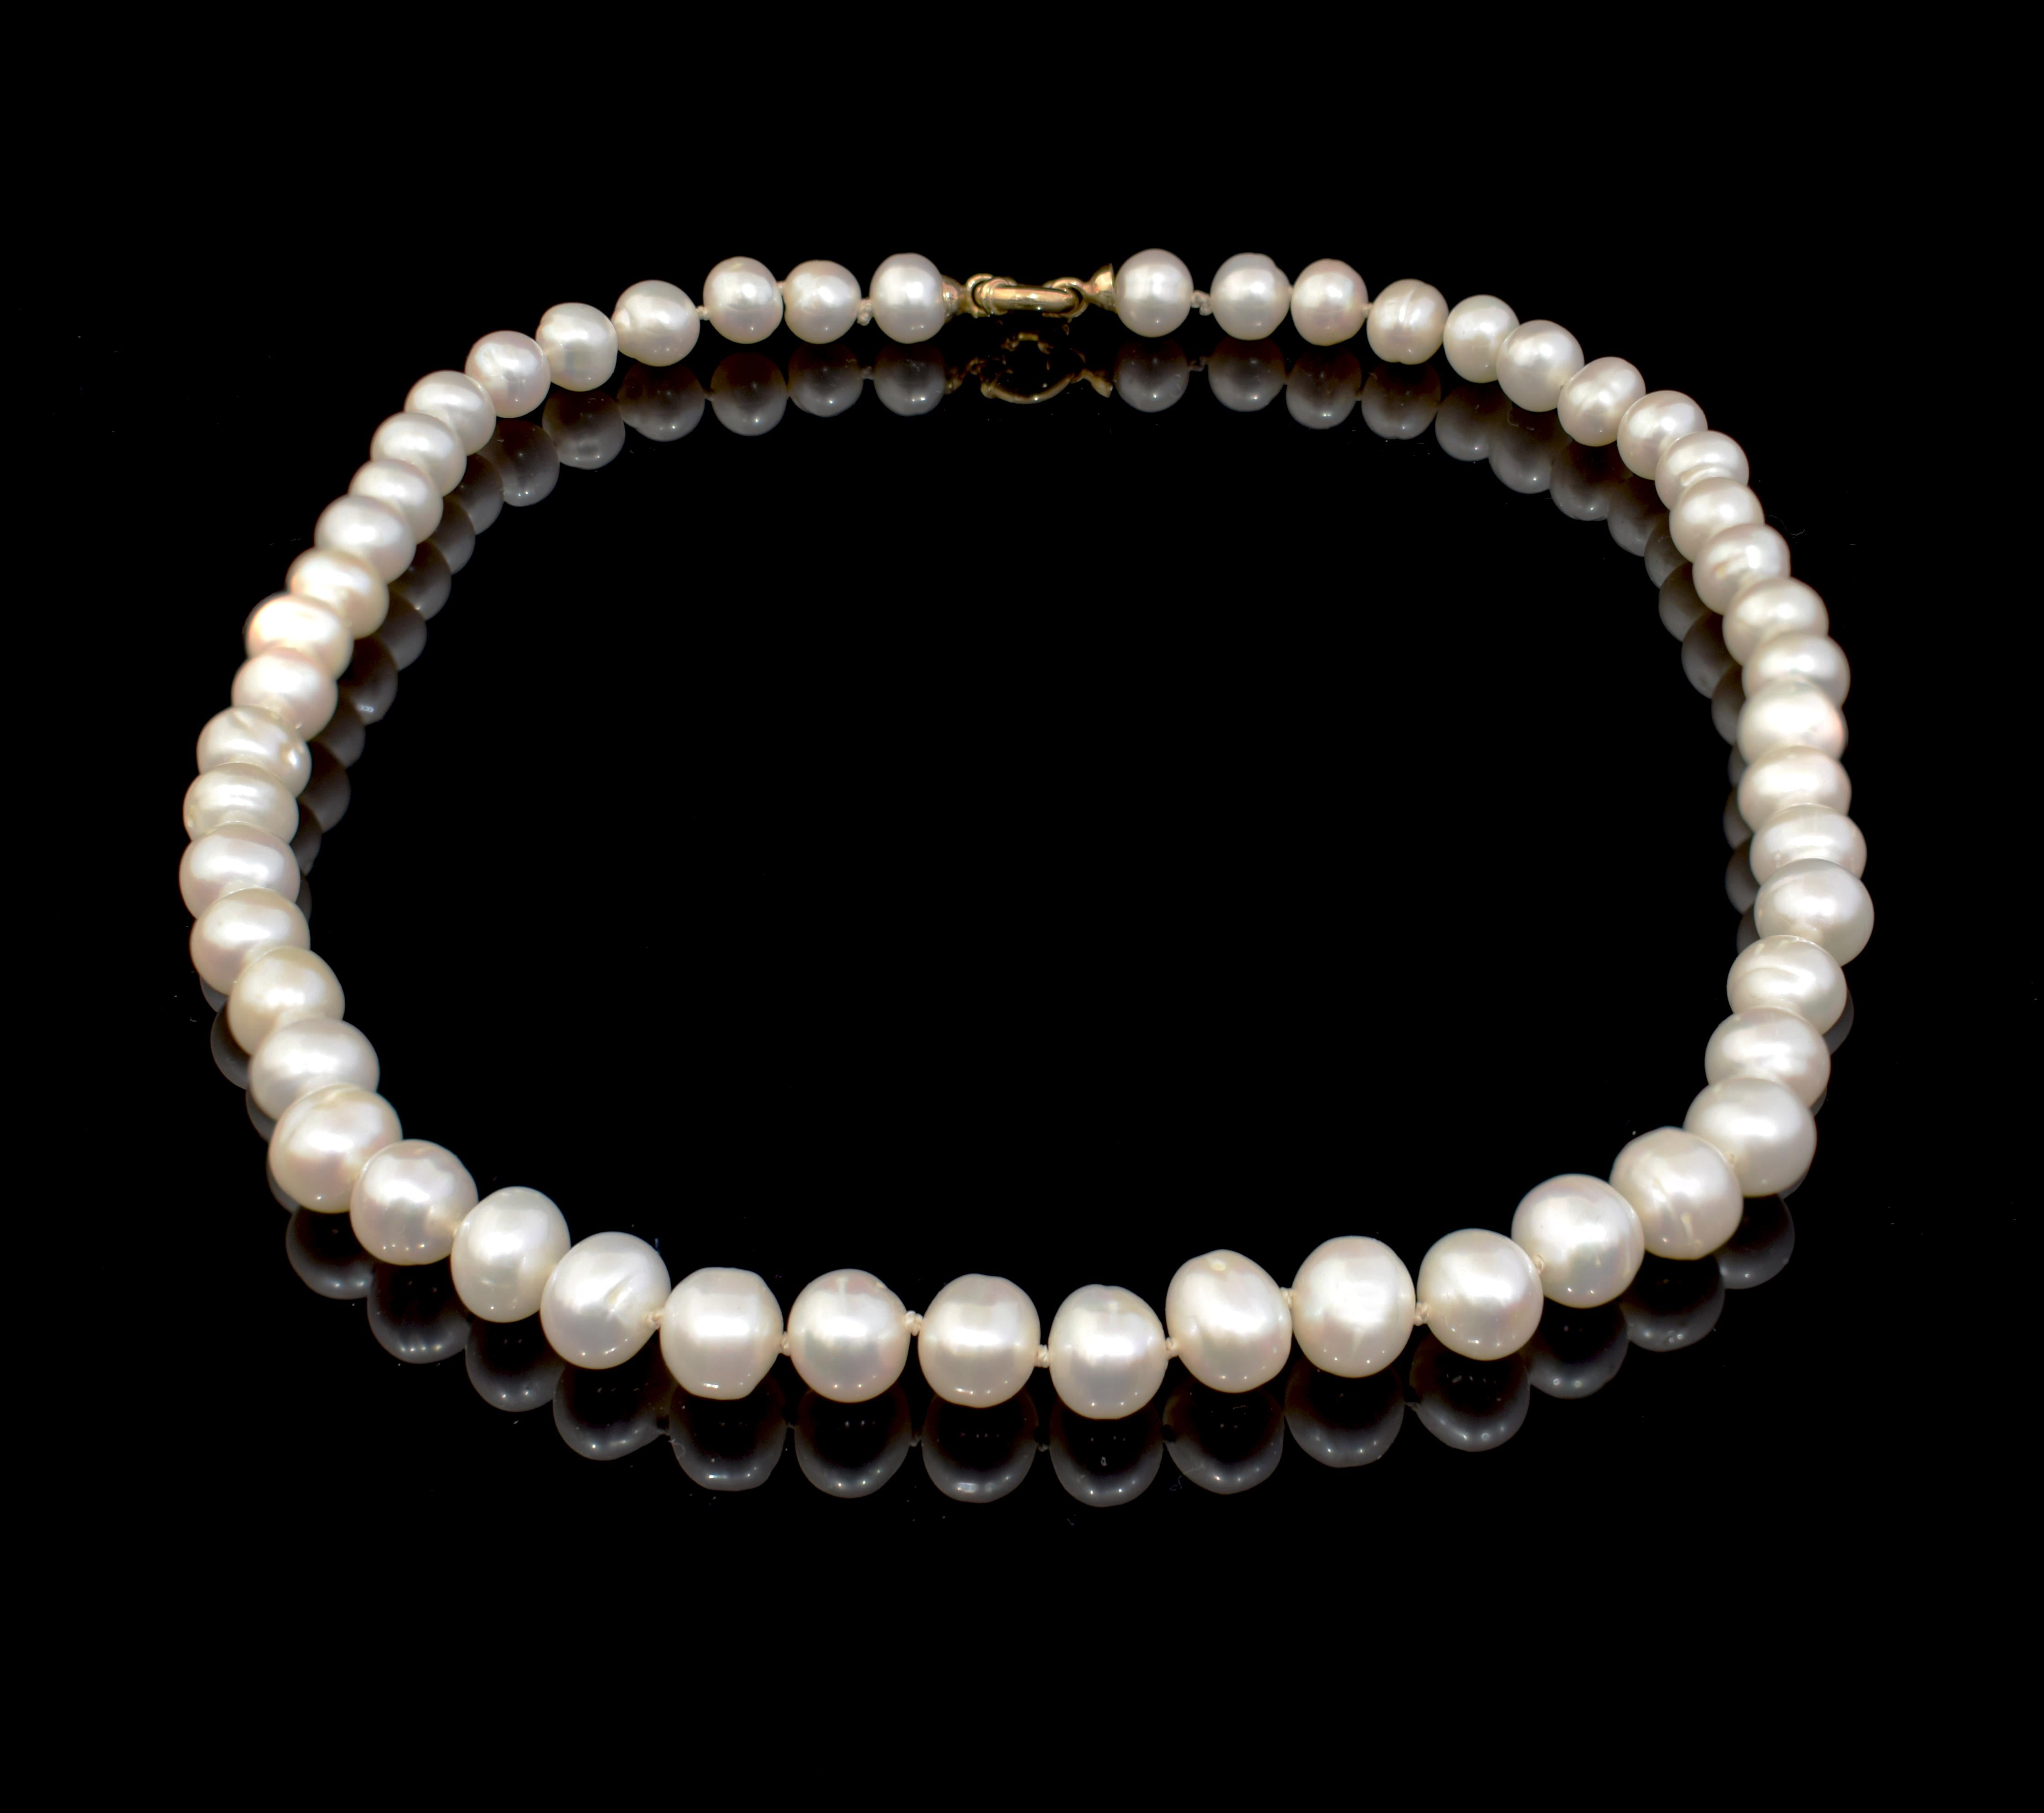 White Pearl Necklace with gold 18k elements